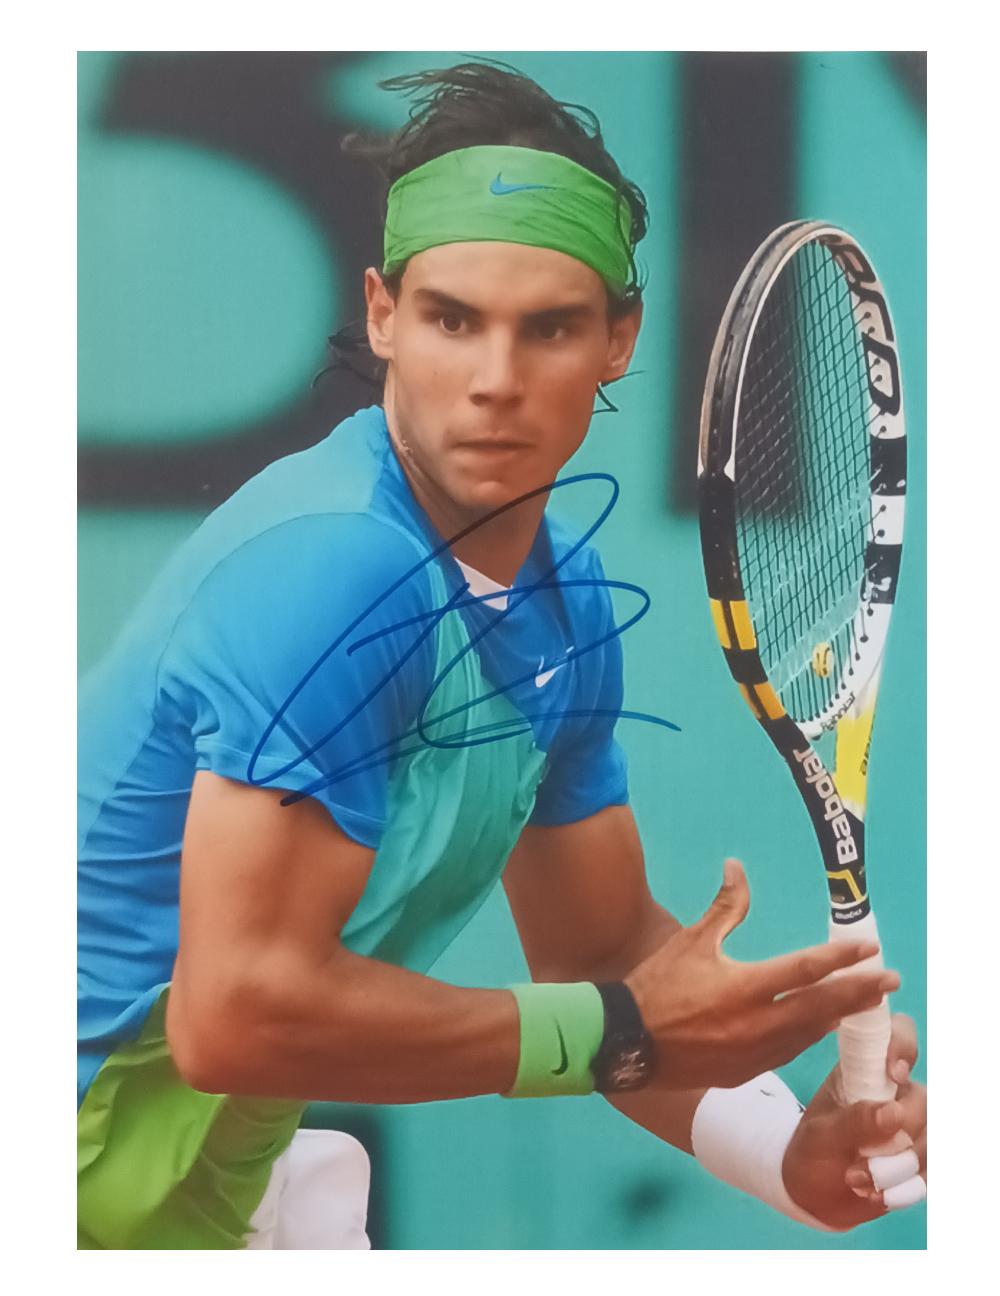 A collection of photographs signed by tennis stars Rafael Nadal, Andy Murray and Roger Federer
A great collection featuring three Grand Slam tournament winners
A collection of three glossy colour photographs signed by Rafael Nadal, Andy Murray and